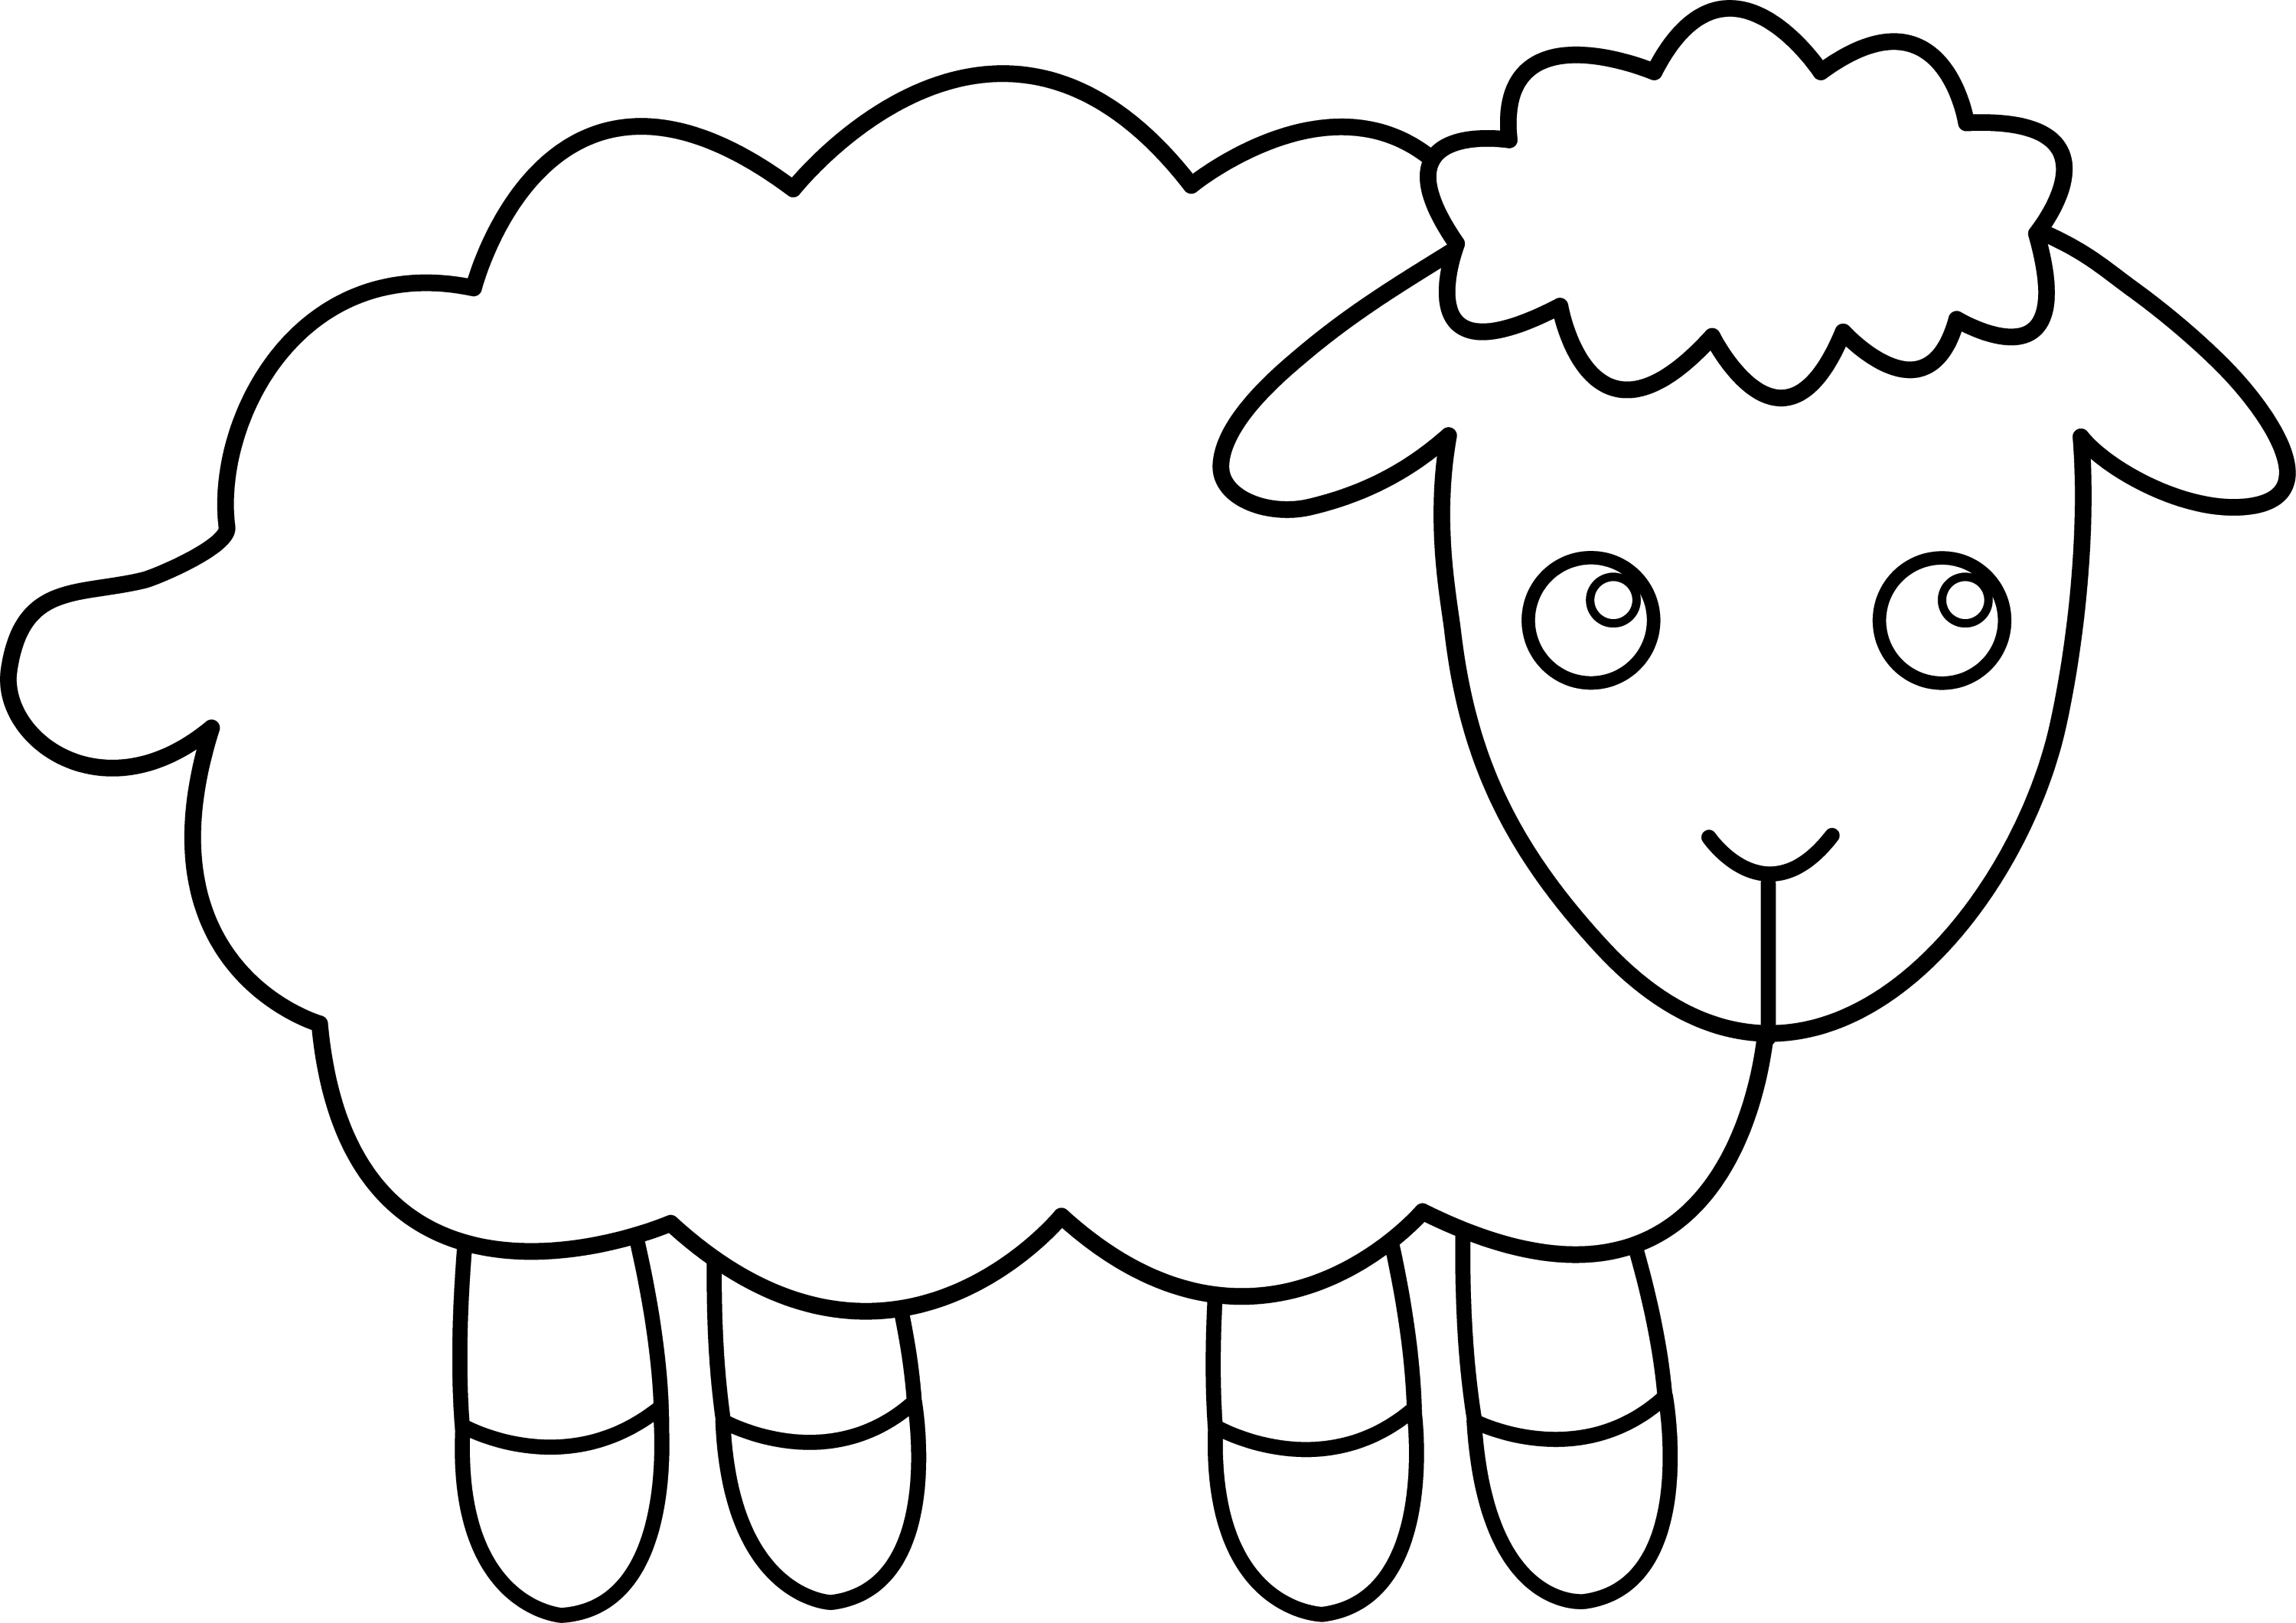 clipart of sheep - photo #46